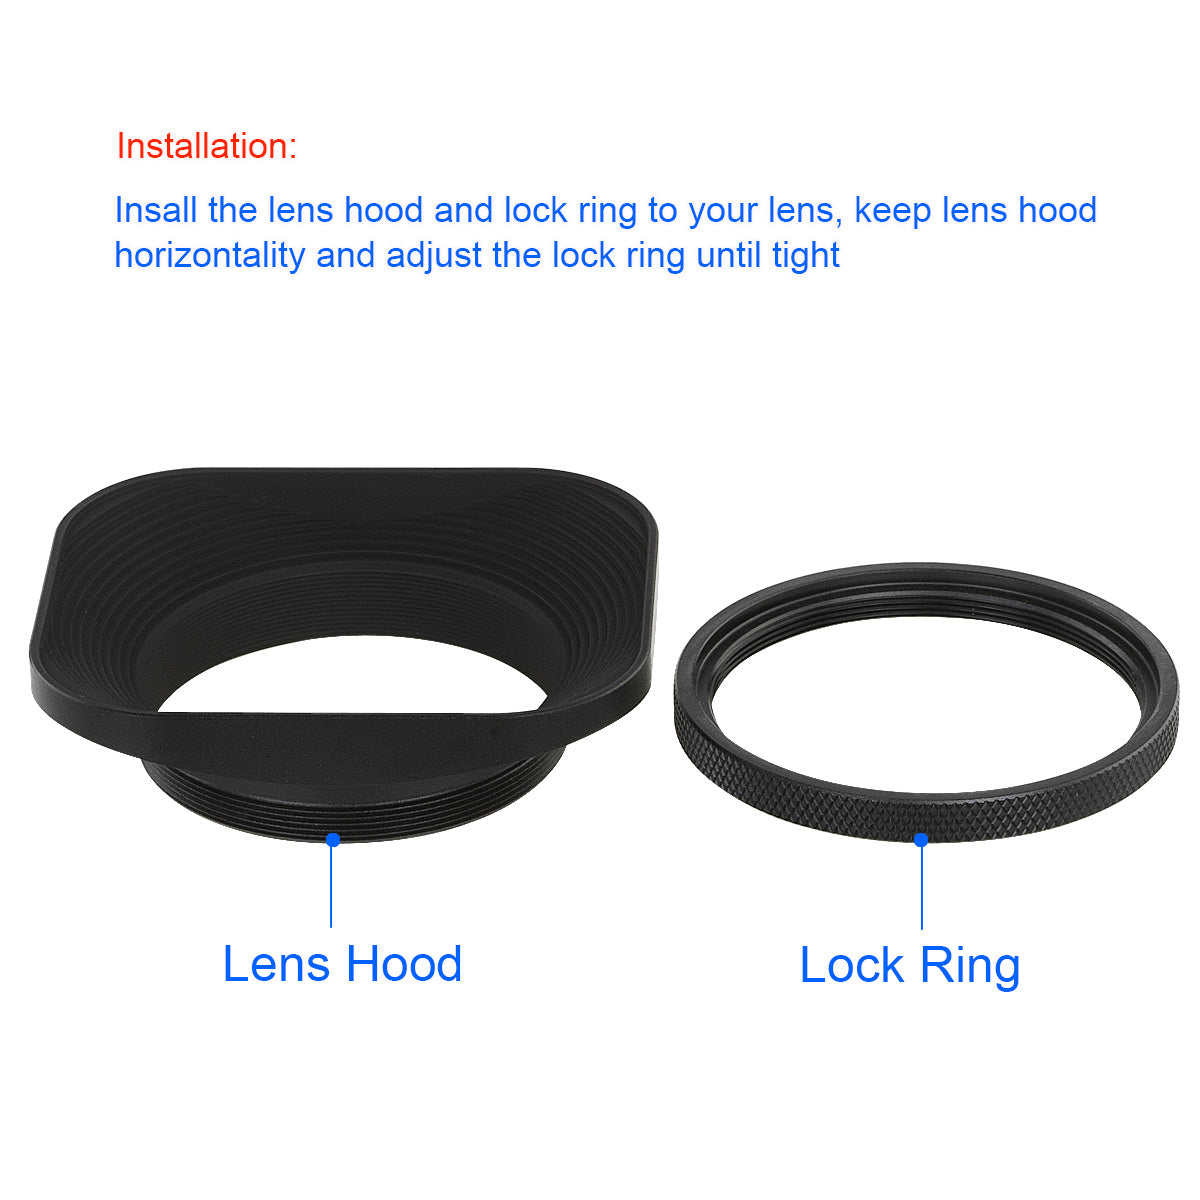 Haoge LH-E2T 49mm Square Metal Screw-in Lens Hood with Cap for Sony RX1 RX1R RX1RII Camera, Sony E 20mm f2.8, 28mm f2, 30mm f3.5, 35mm f1.8, 50mm f1.8, TE 24mm F1.8, 55mm F1.8, TFE 35mm F2.8 Lens